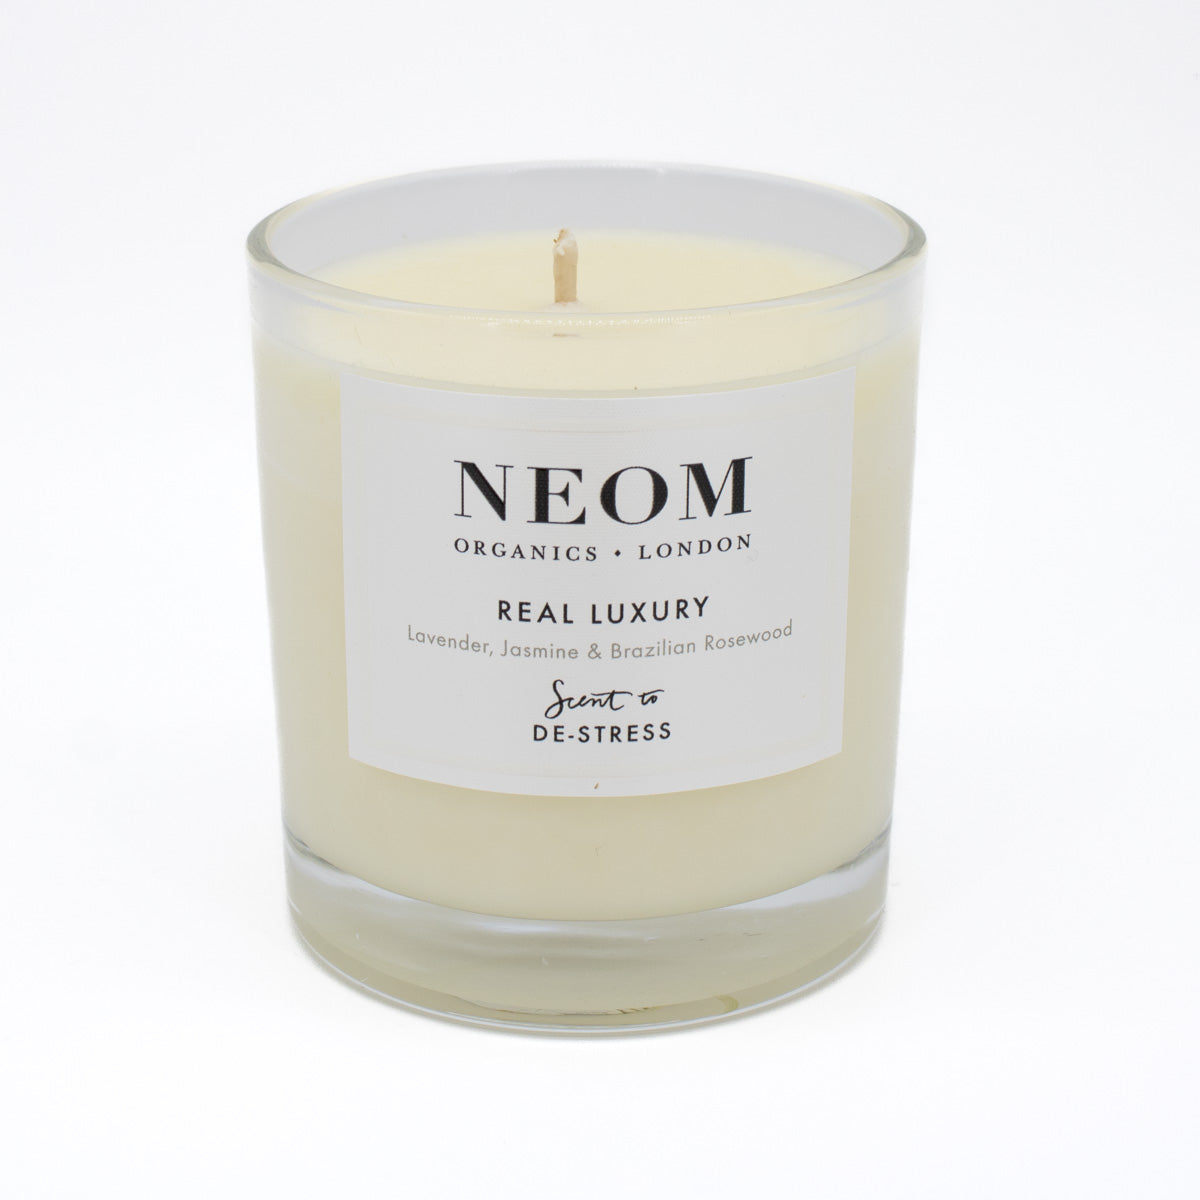 NEOM Real Luxury Scented Candle DE-STRESS 6.52oz- Imperfect Box